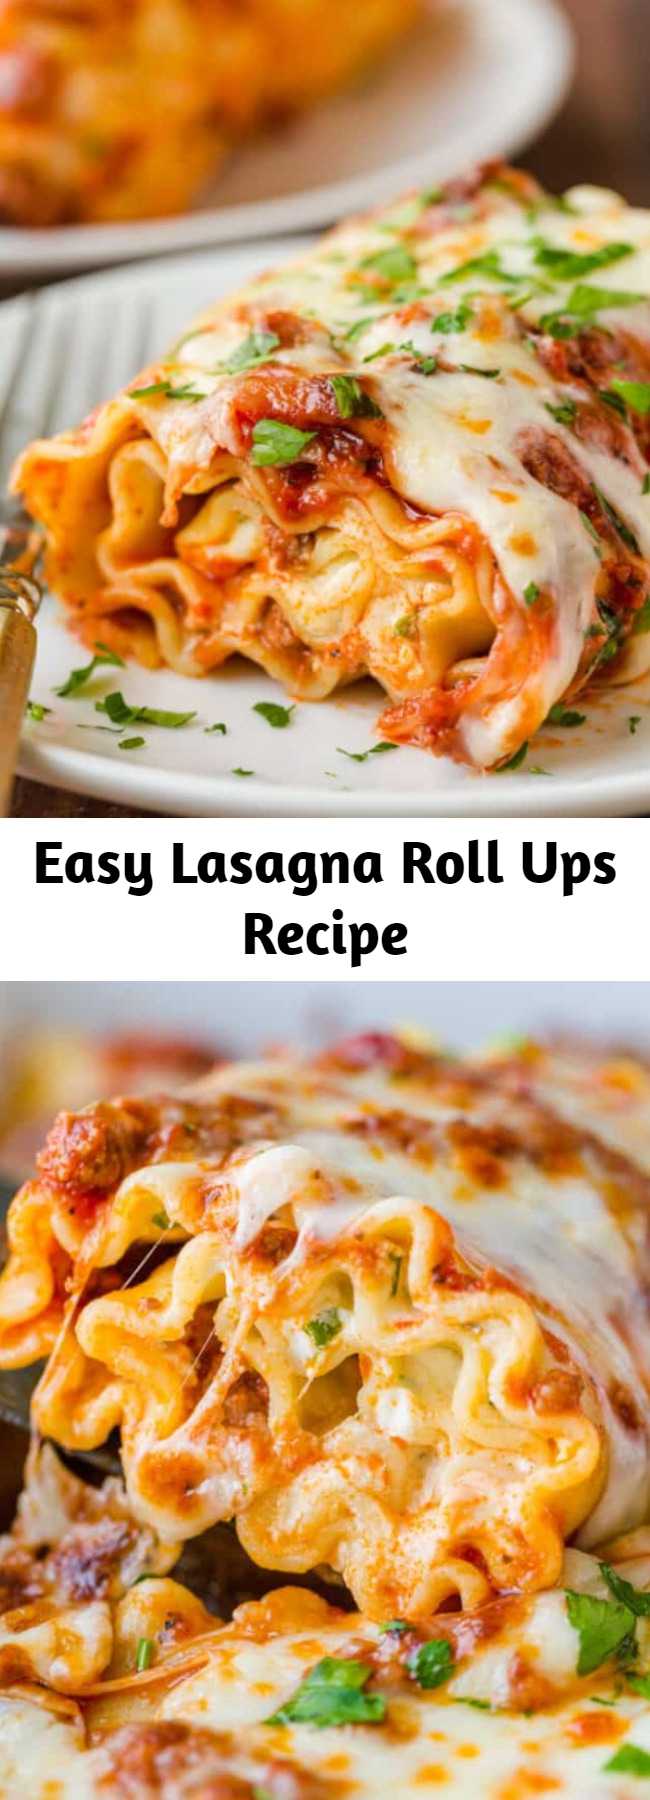 Easy Lasagna Roll Ups Recipe - Lasagna Roll Ups combine the best of classic Lasagna but they are so much easier to serve, bake faster, and can be enjoyed right away - no resting time required! Lasagna rolls are make-ahead, freezer-friendly, and reheat well. #lasagnarollups #lasagna #easylasagna #pasta #italian #groundbeef #cheese